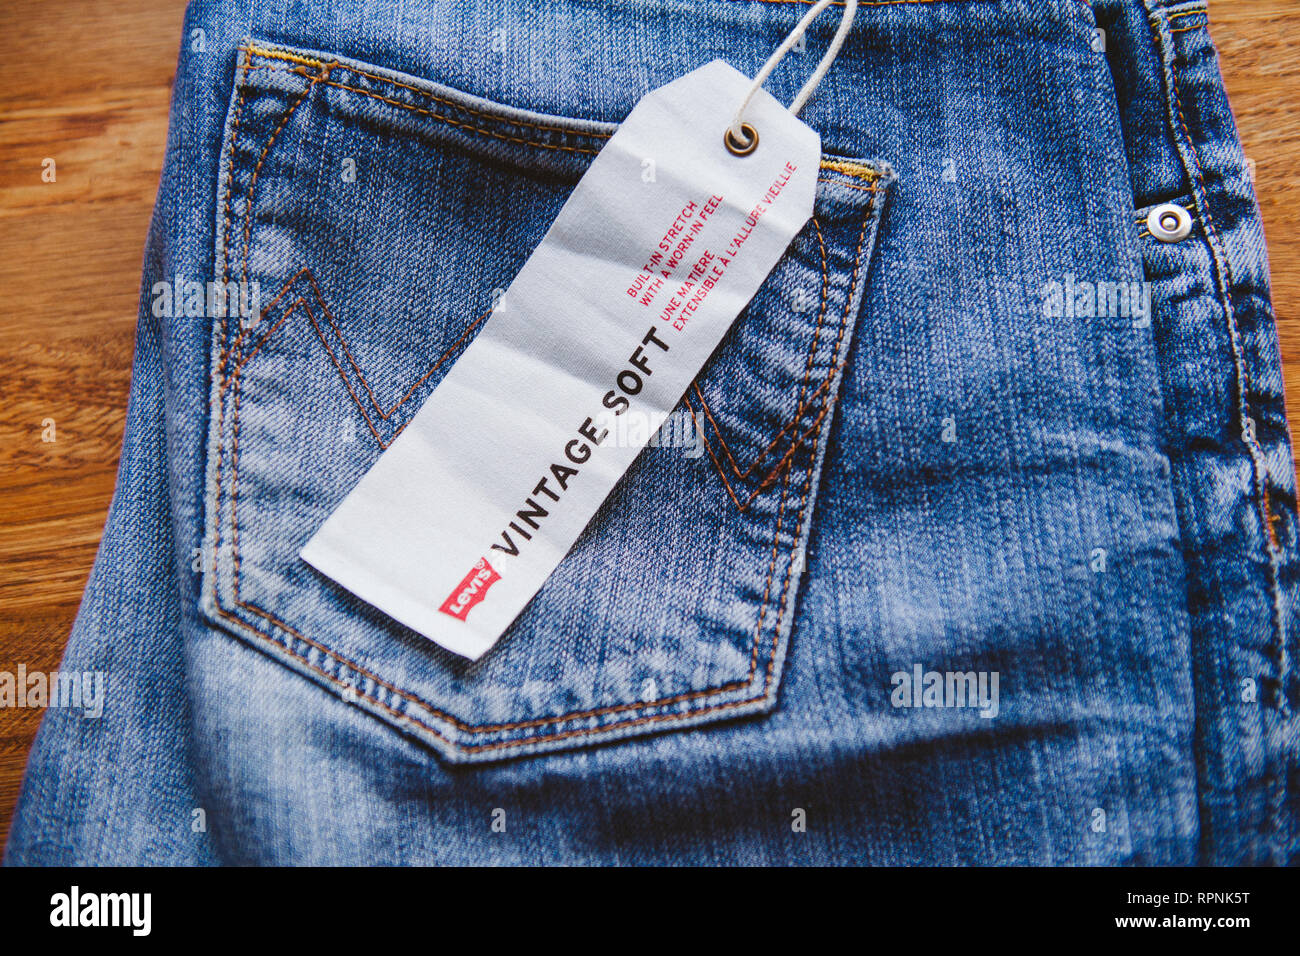 PARIS, FRANCE JAN 2, 2018: New Jeans With Price Tag Manufactured By The  Levi's Placed On Natural Wooden Table Model Vintage Soft Price Tag 110  Euros Stock Photo Alamy 